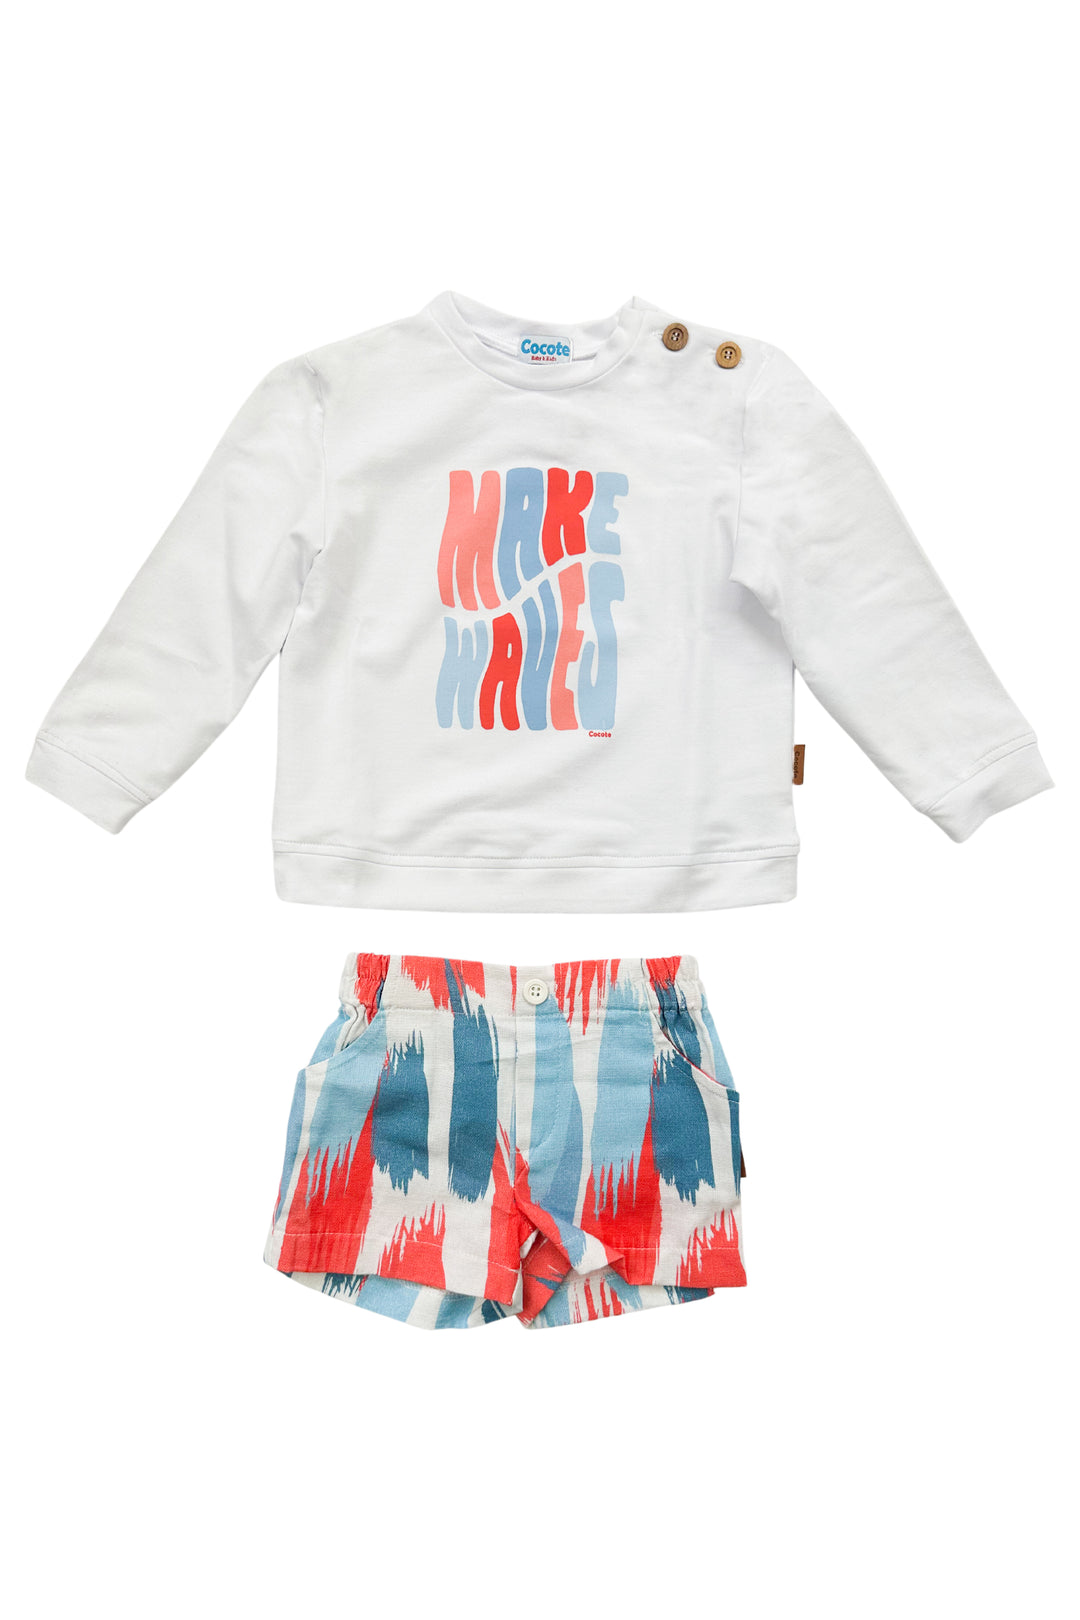 Cocote "Jacob" Multicoloured Abstract Top & Shorts | Millie and John